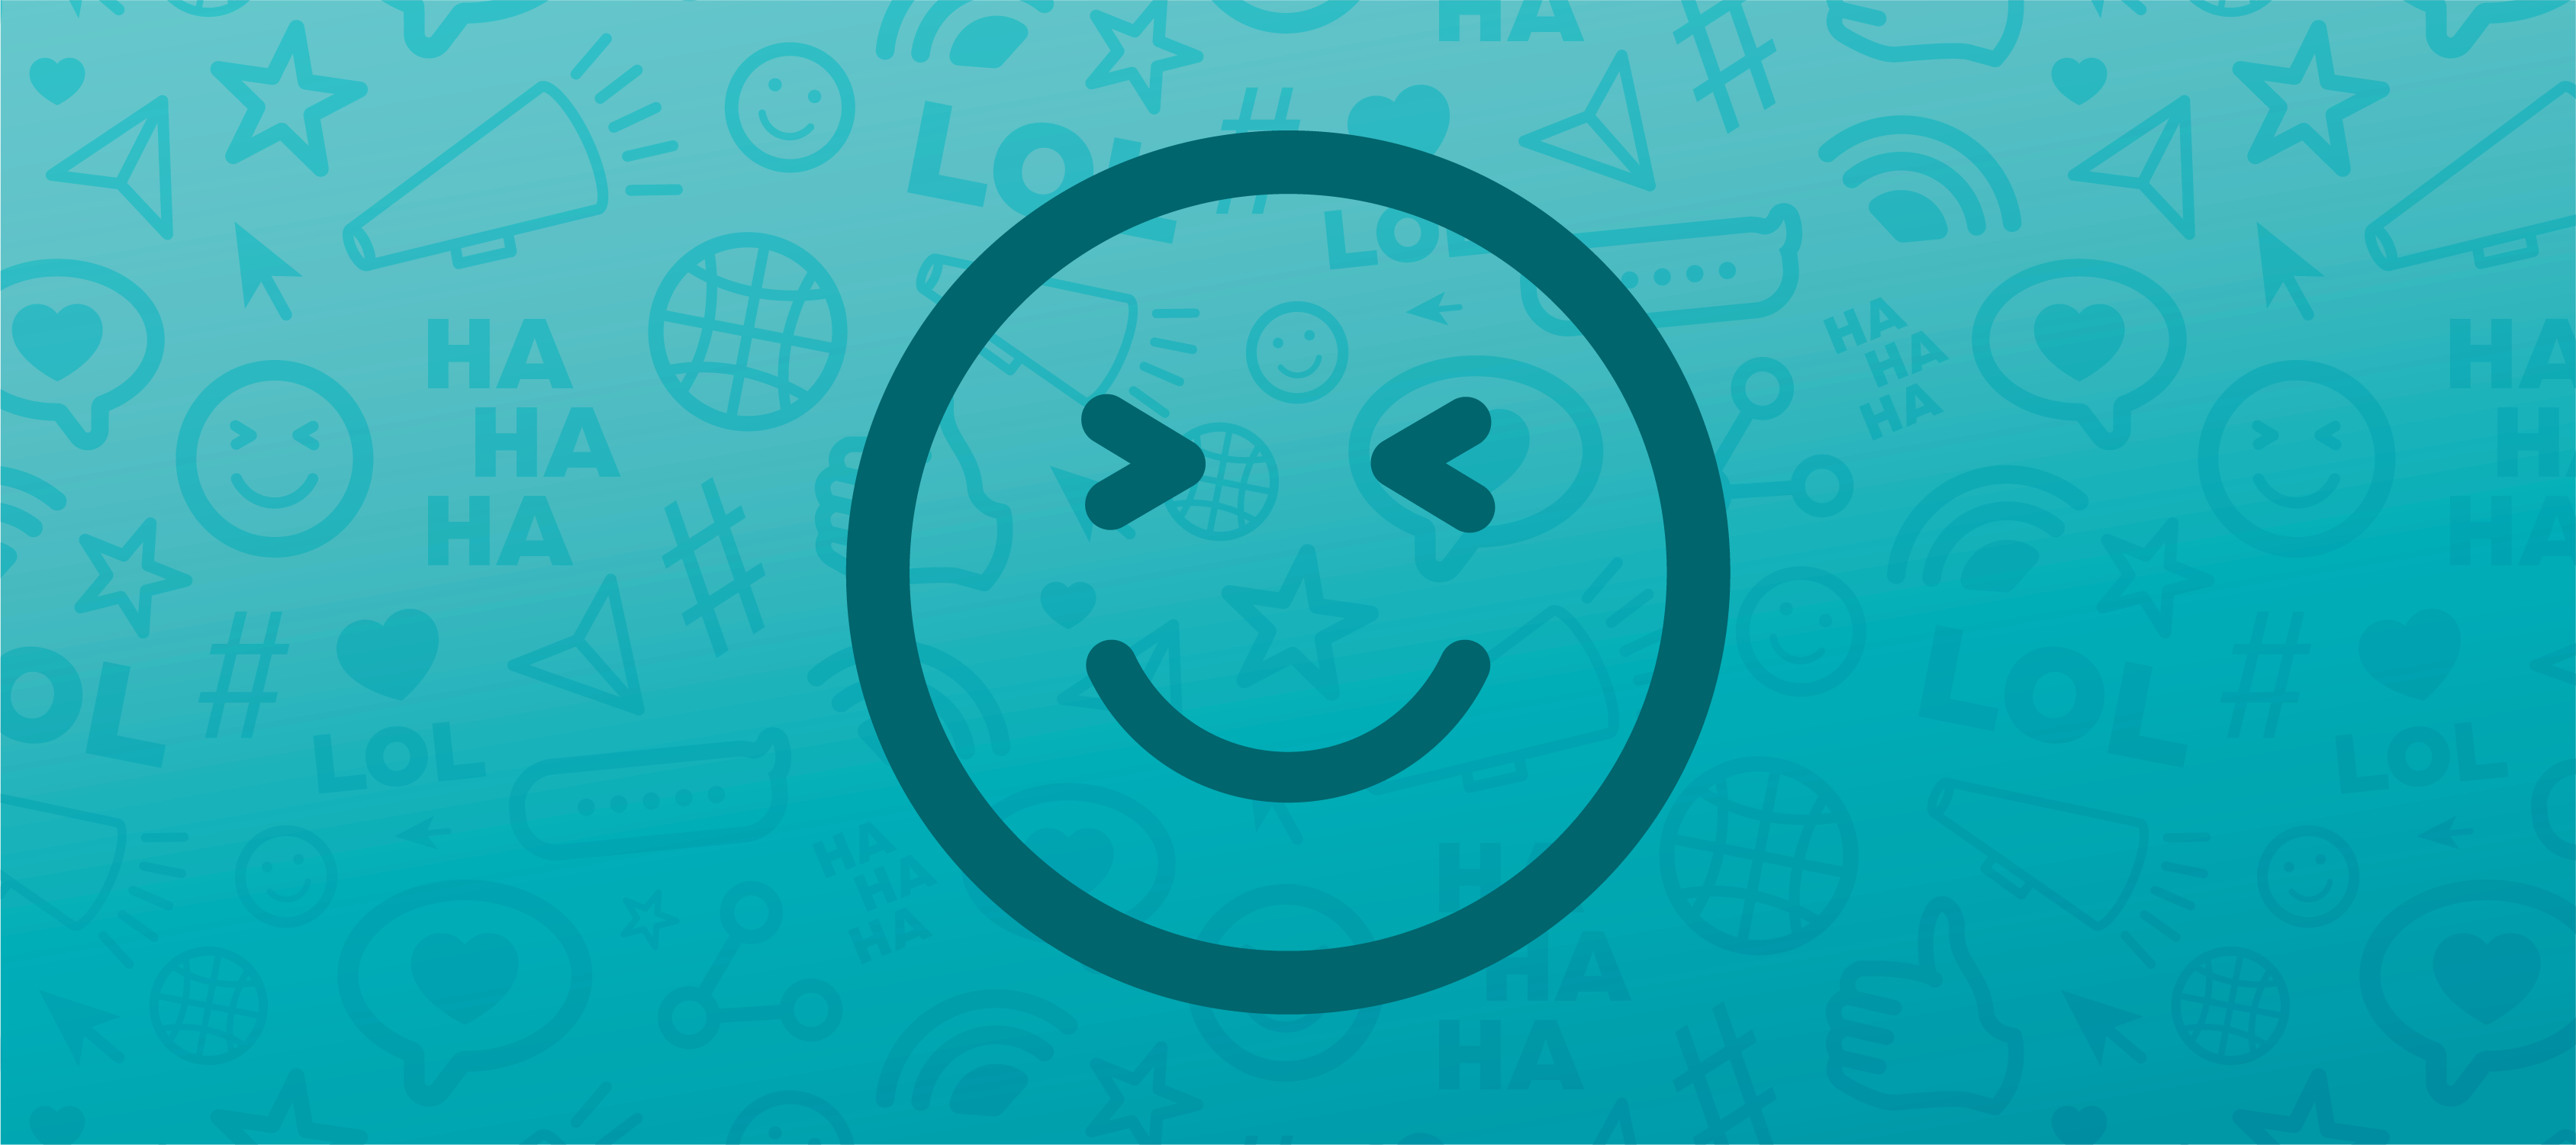 A blue header image featuring an icon of a smiley face in the center and faded social icons in the background